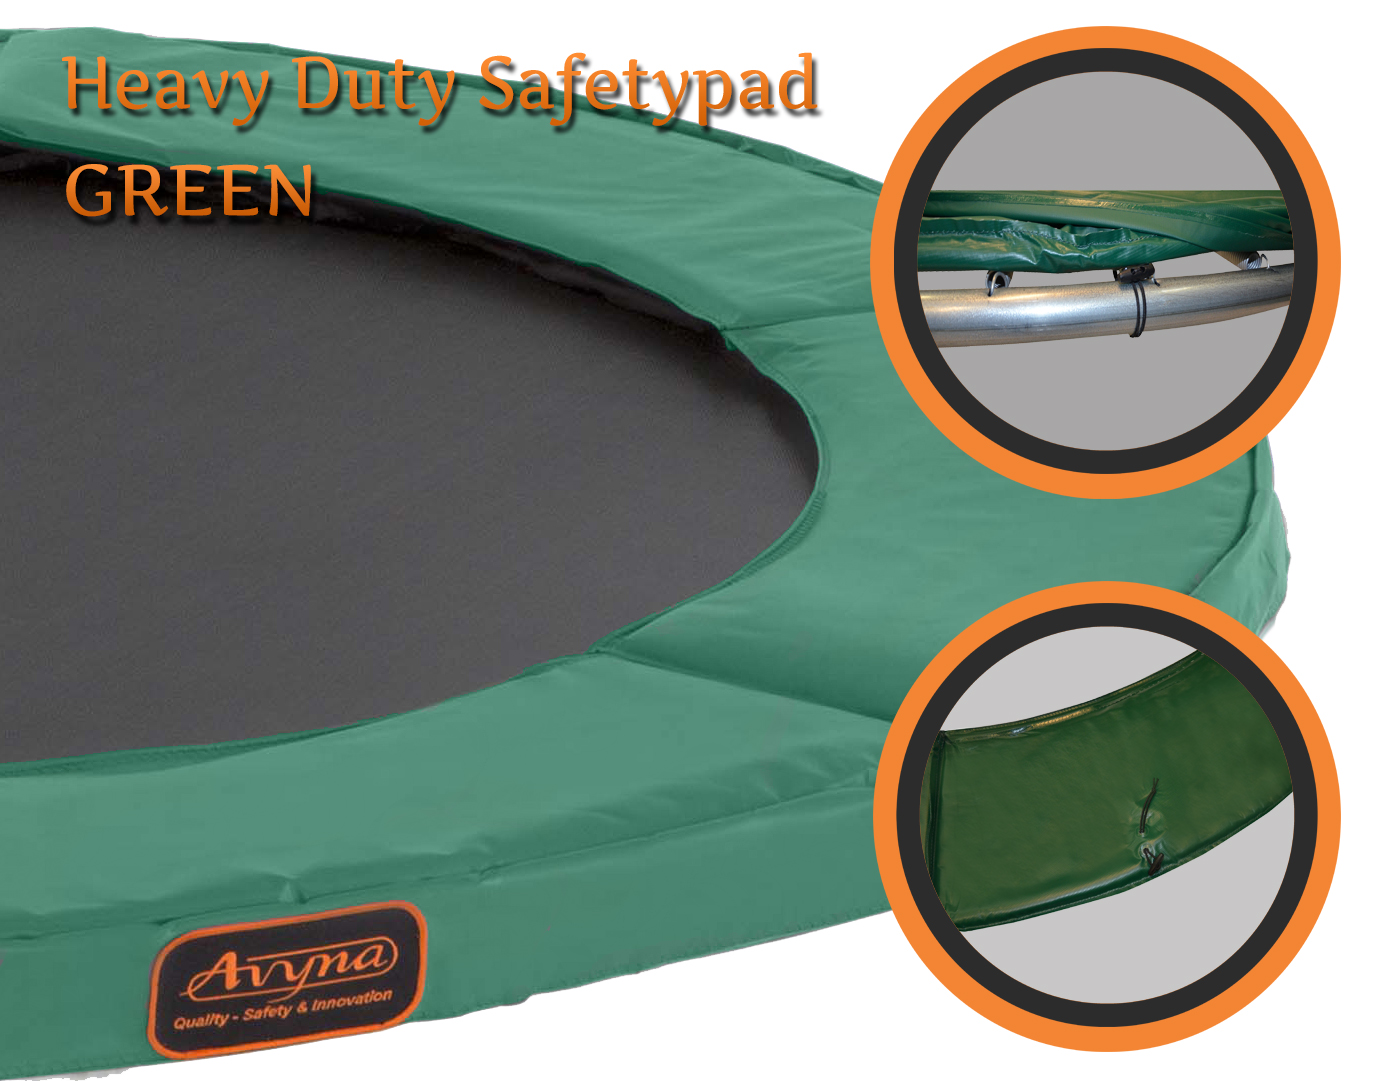 Universal Safety Pad 12ft Heavy Duty Green